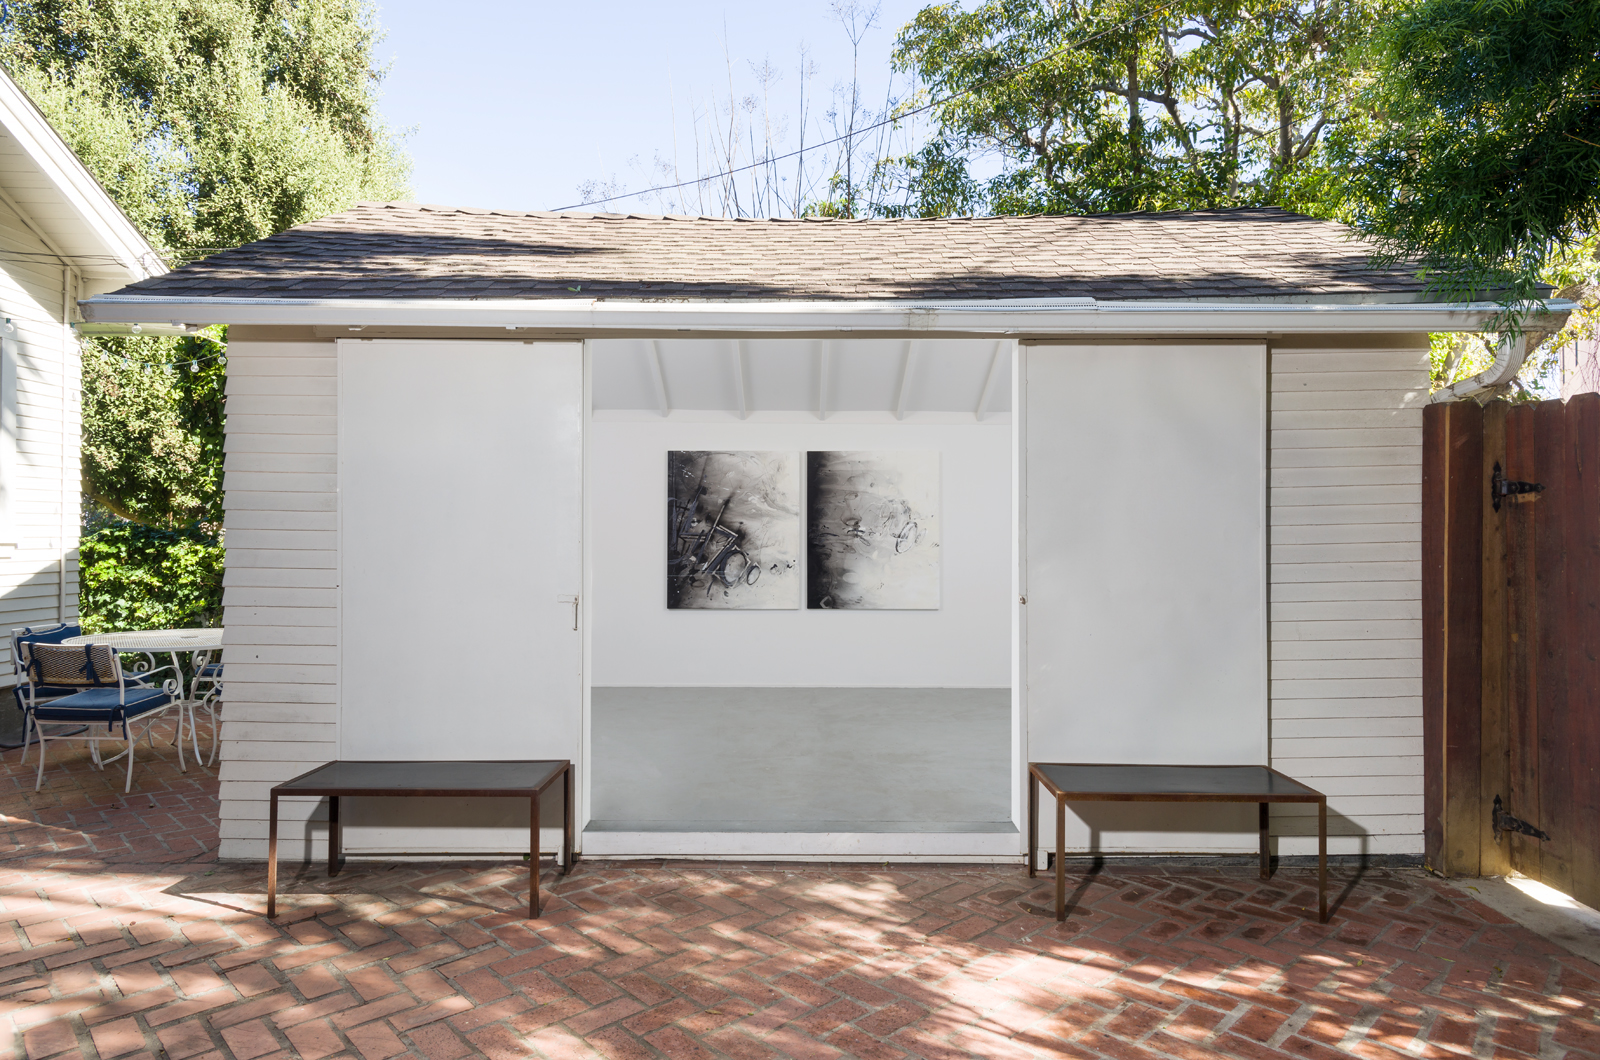  Installation view of "rank" exhibition, team (bungalow).    